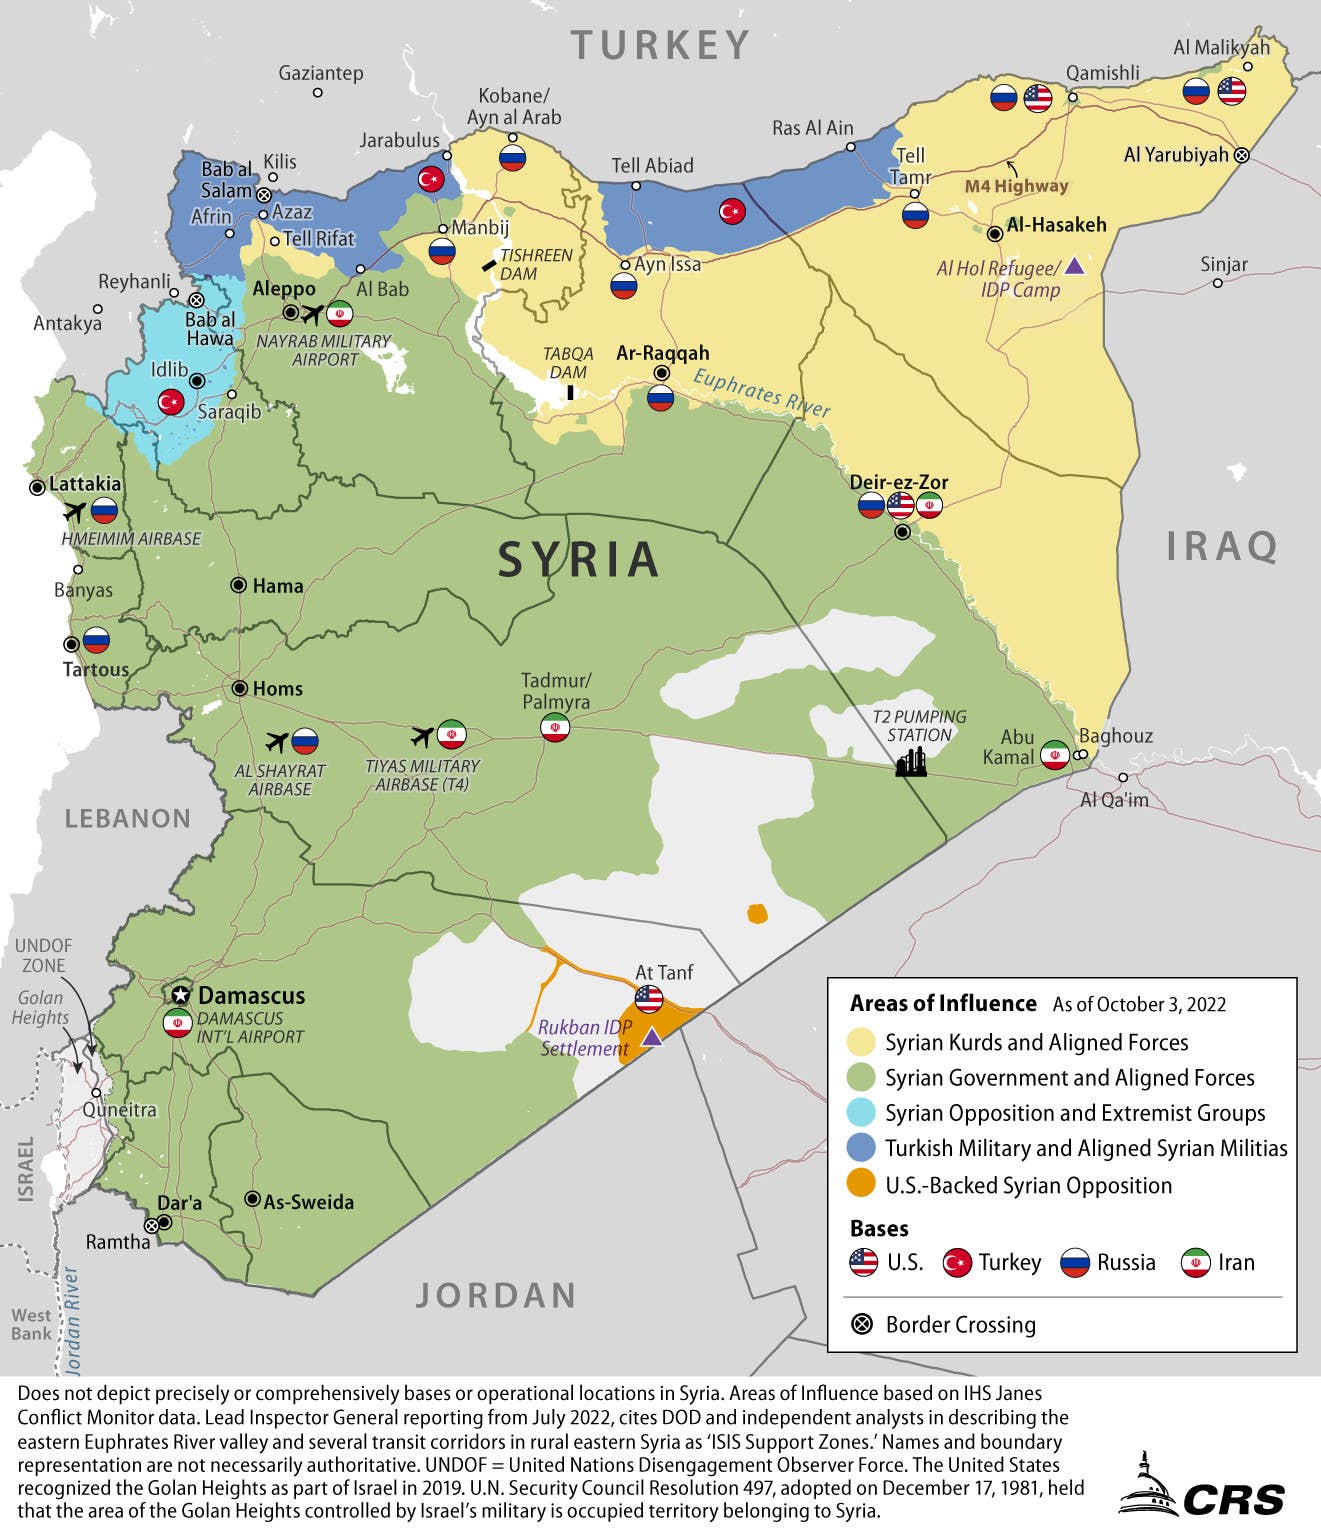 A map of Syria showing the general zones of control of US and US-backed forces, as well as a plethora of actors, including the Russian military, as of October 2022. <em>CRS</em>